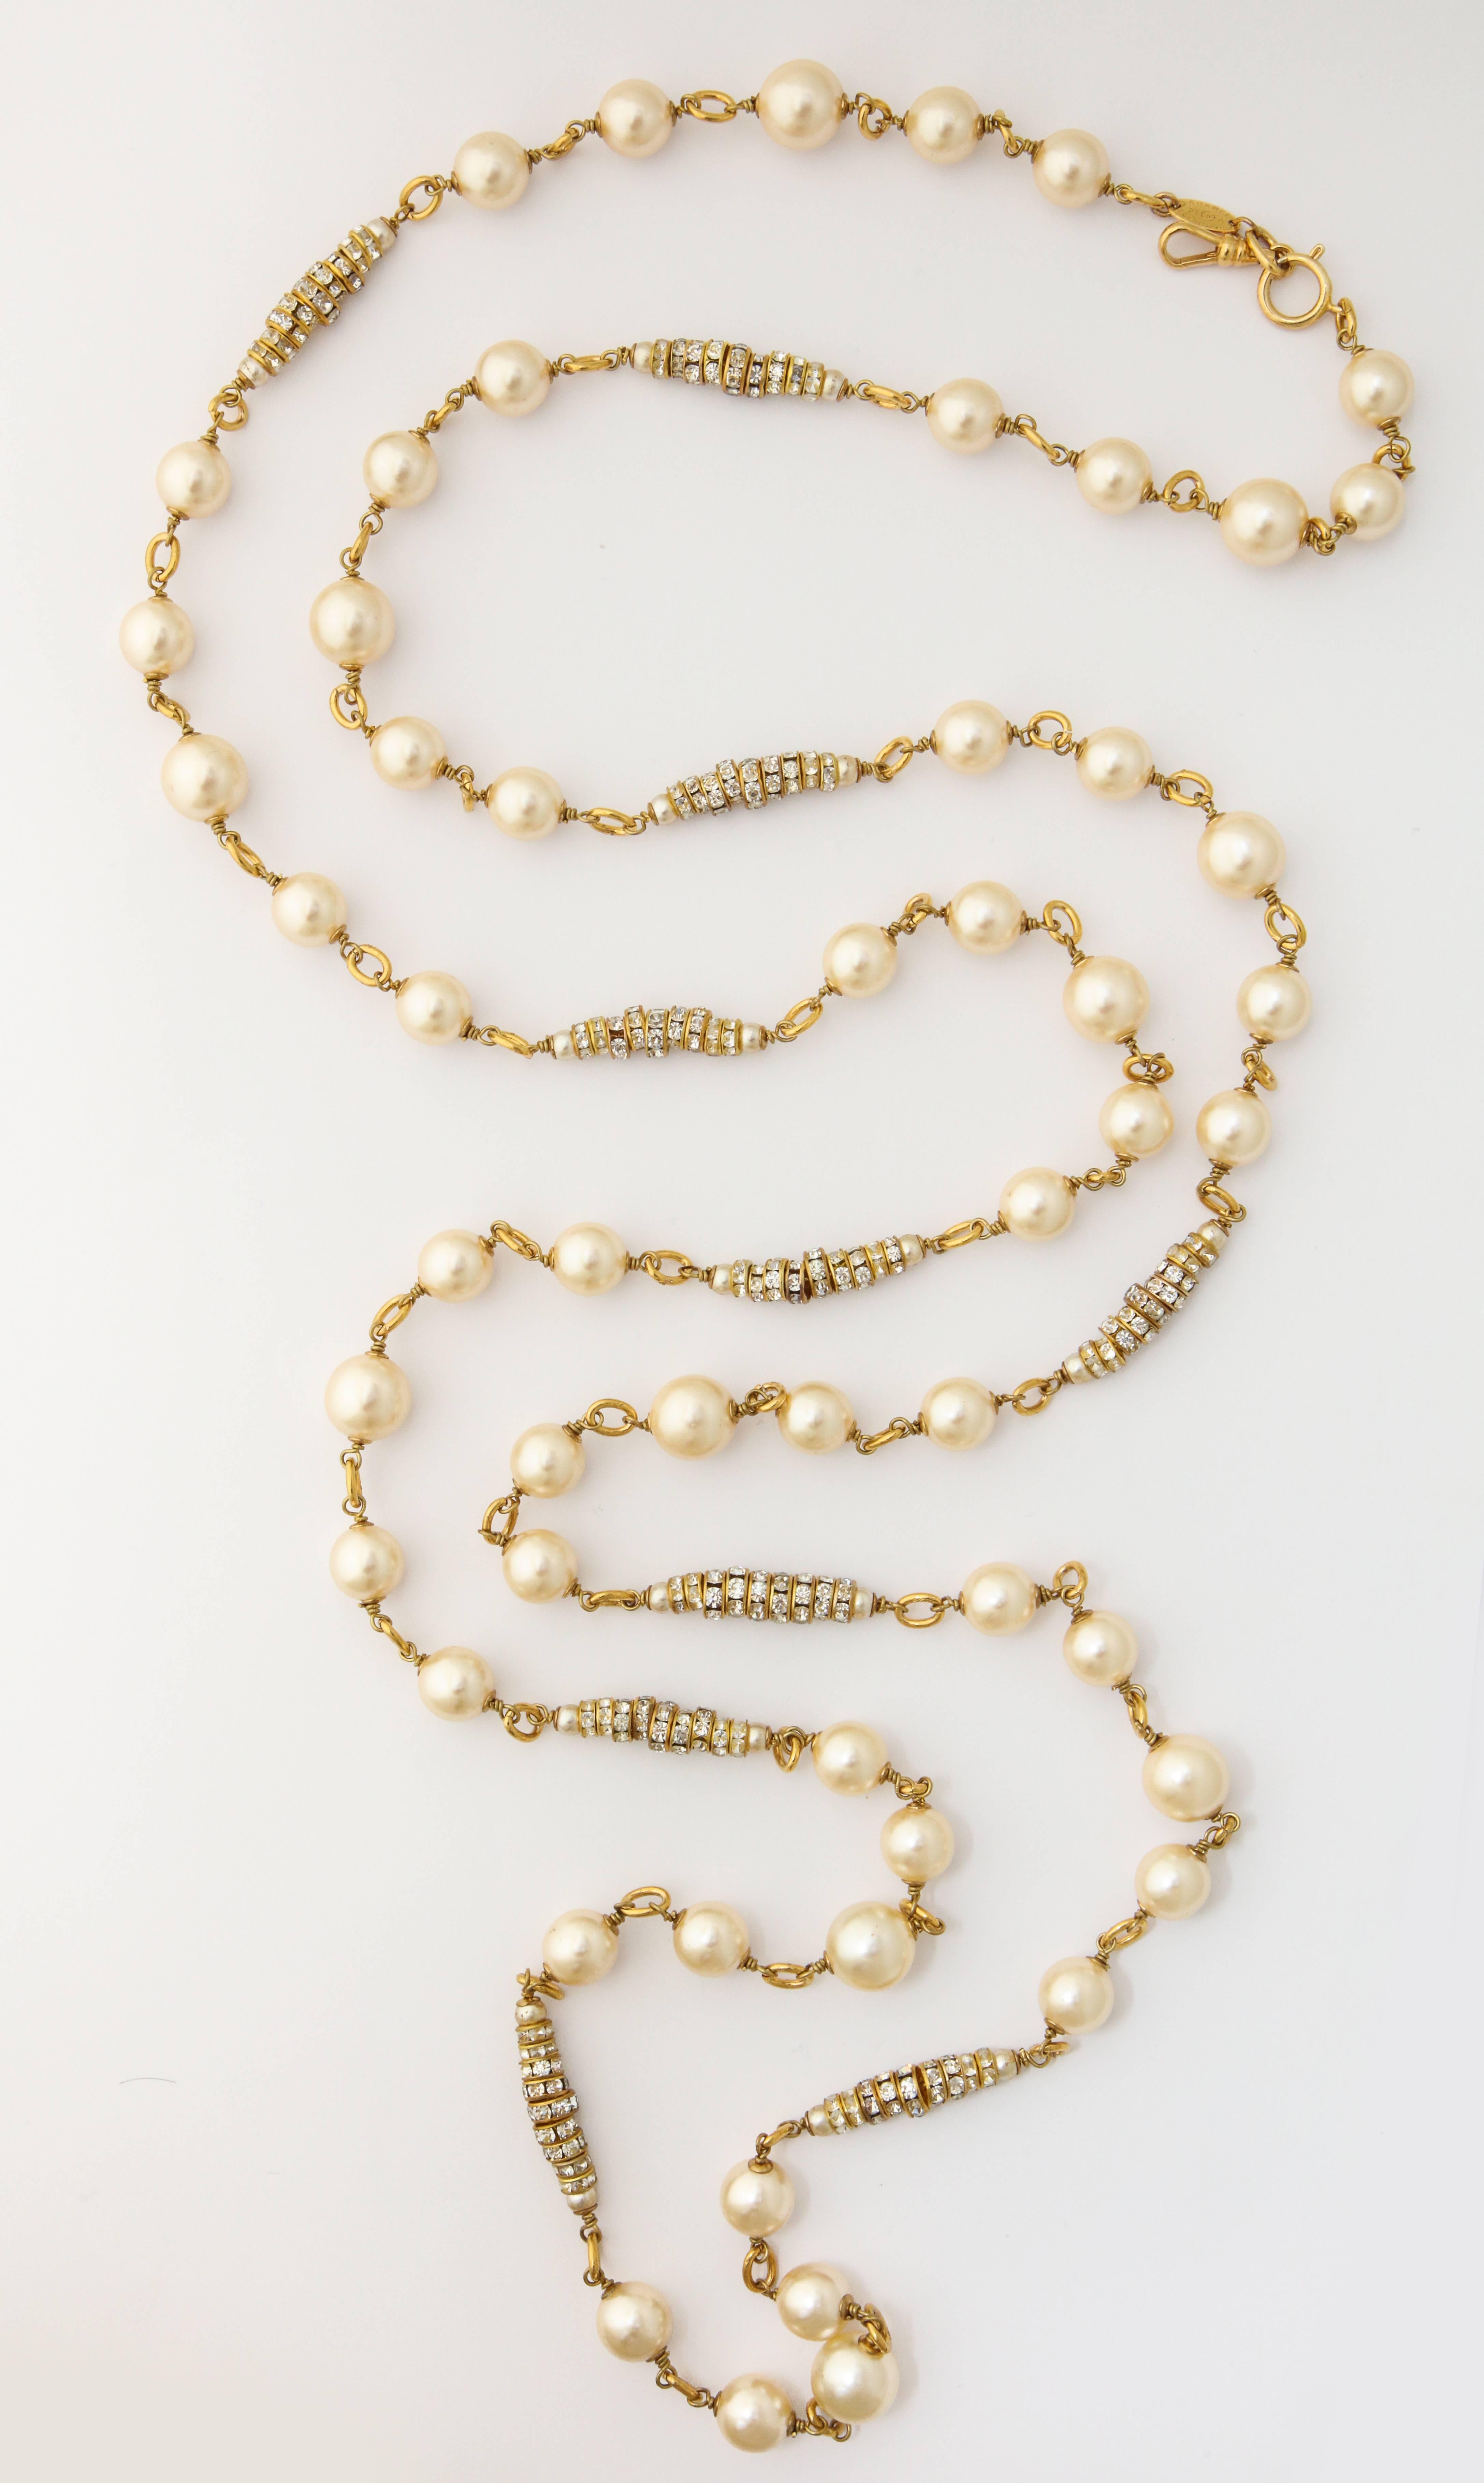 A wonderful long necklace by Chanel with faux natural pearls on a long chain with several rhinestone clusters. It can be worn doubled and triple up.